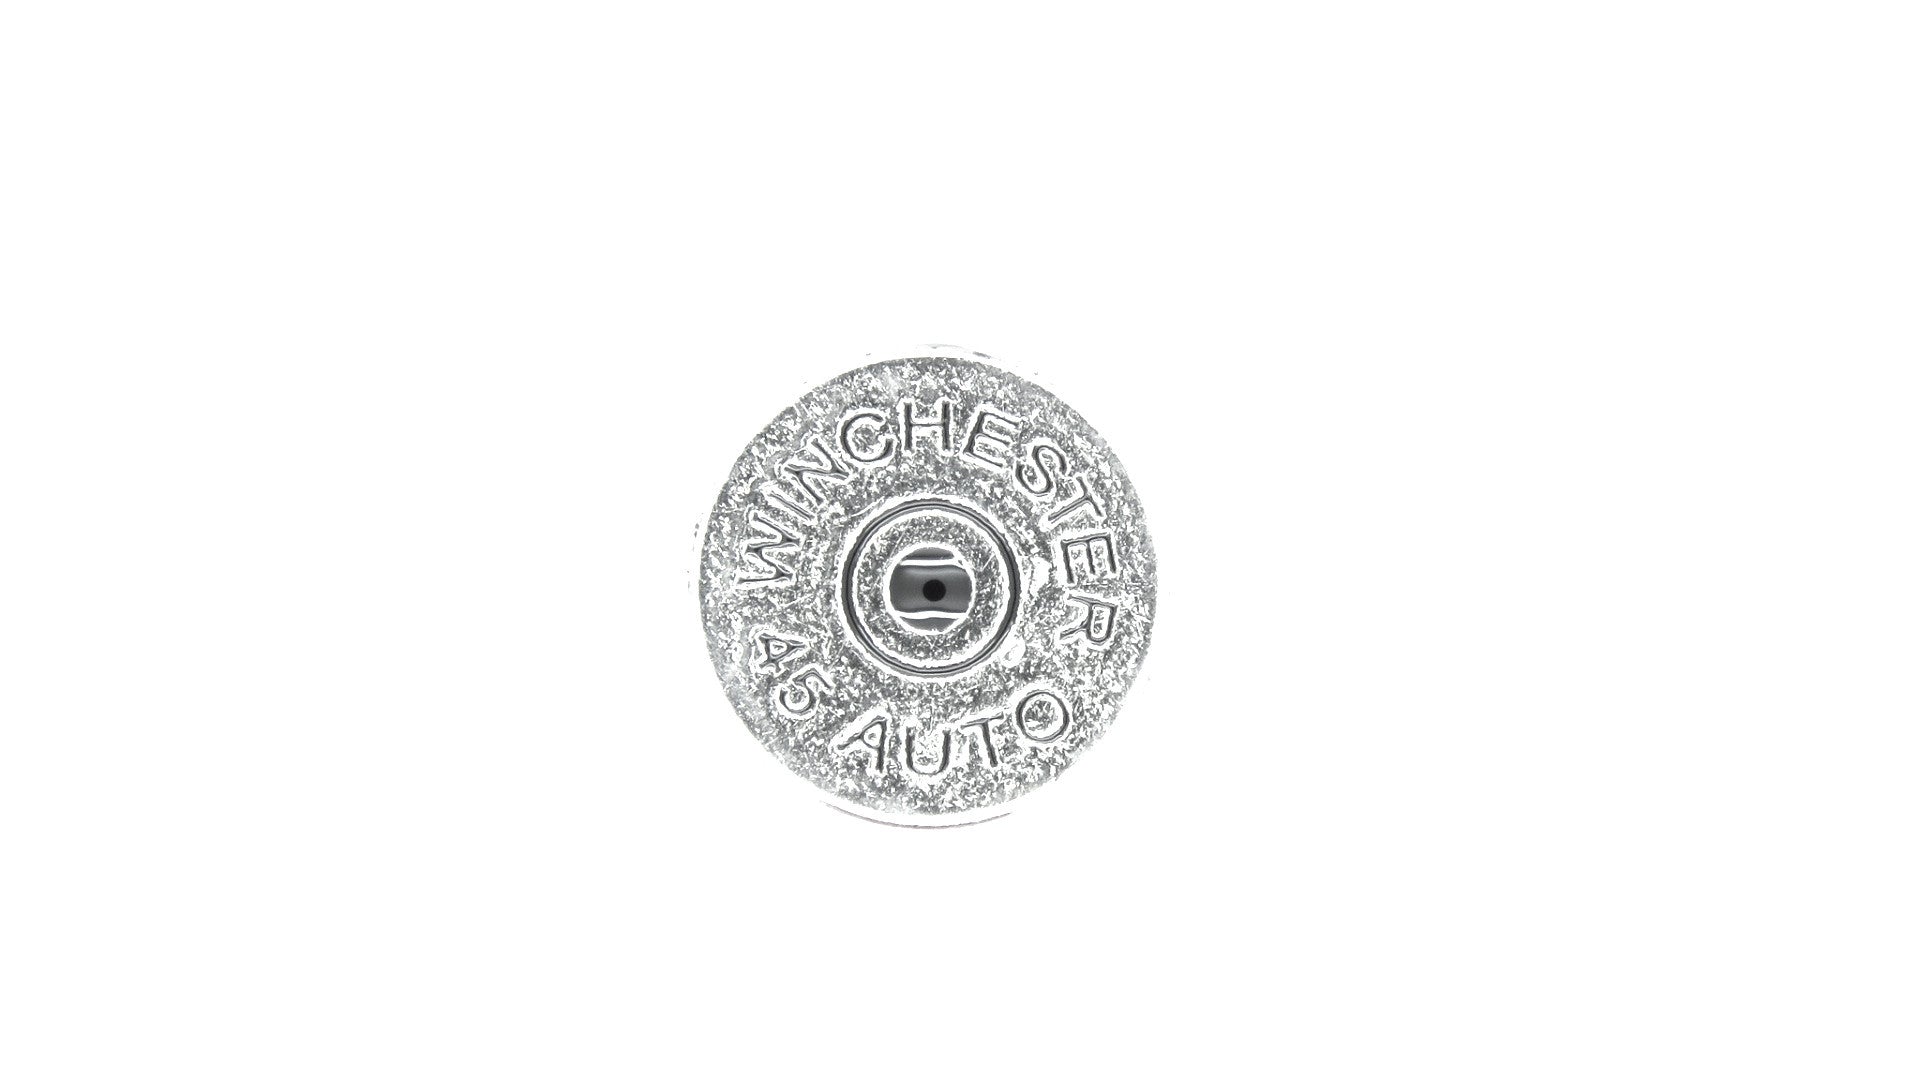 Replica Winchester 45 Bullet Floating Charm - Stoney Creek Charms